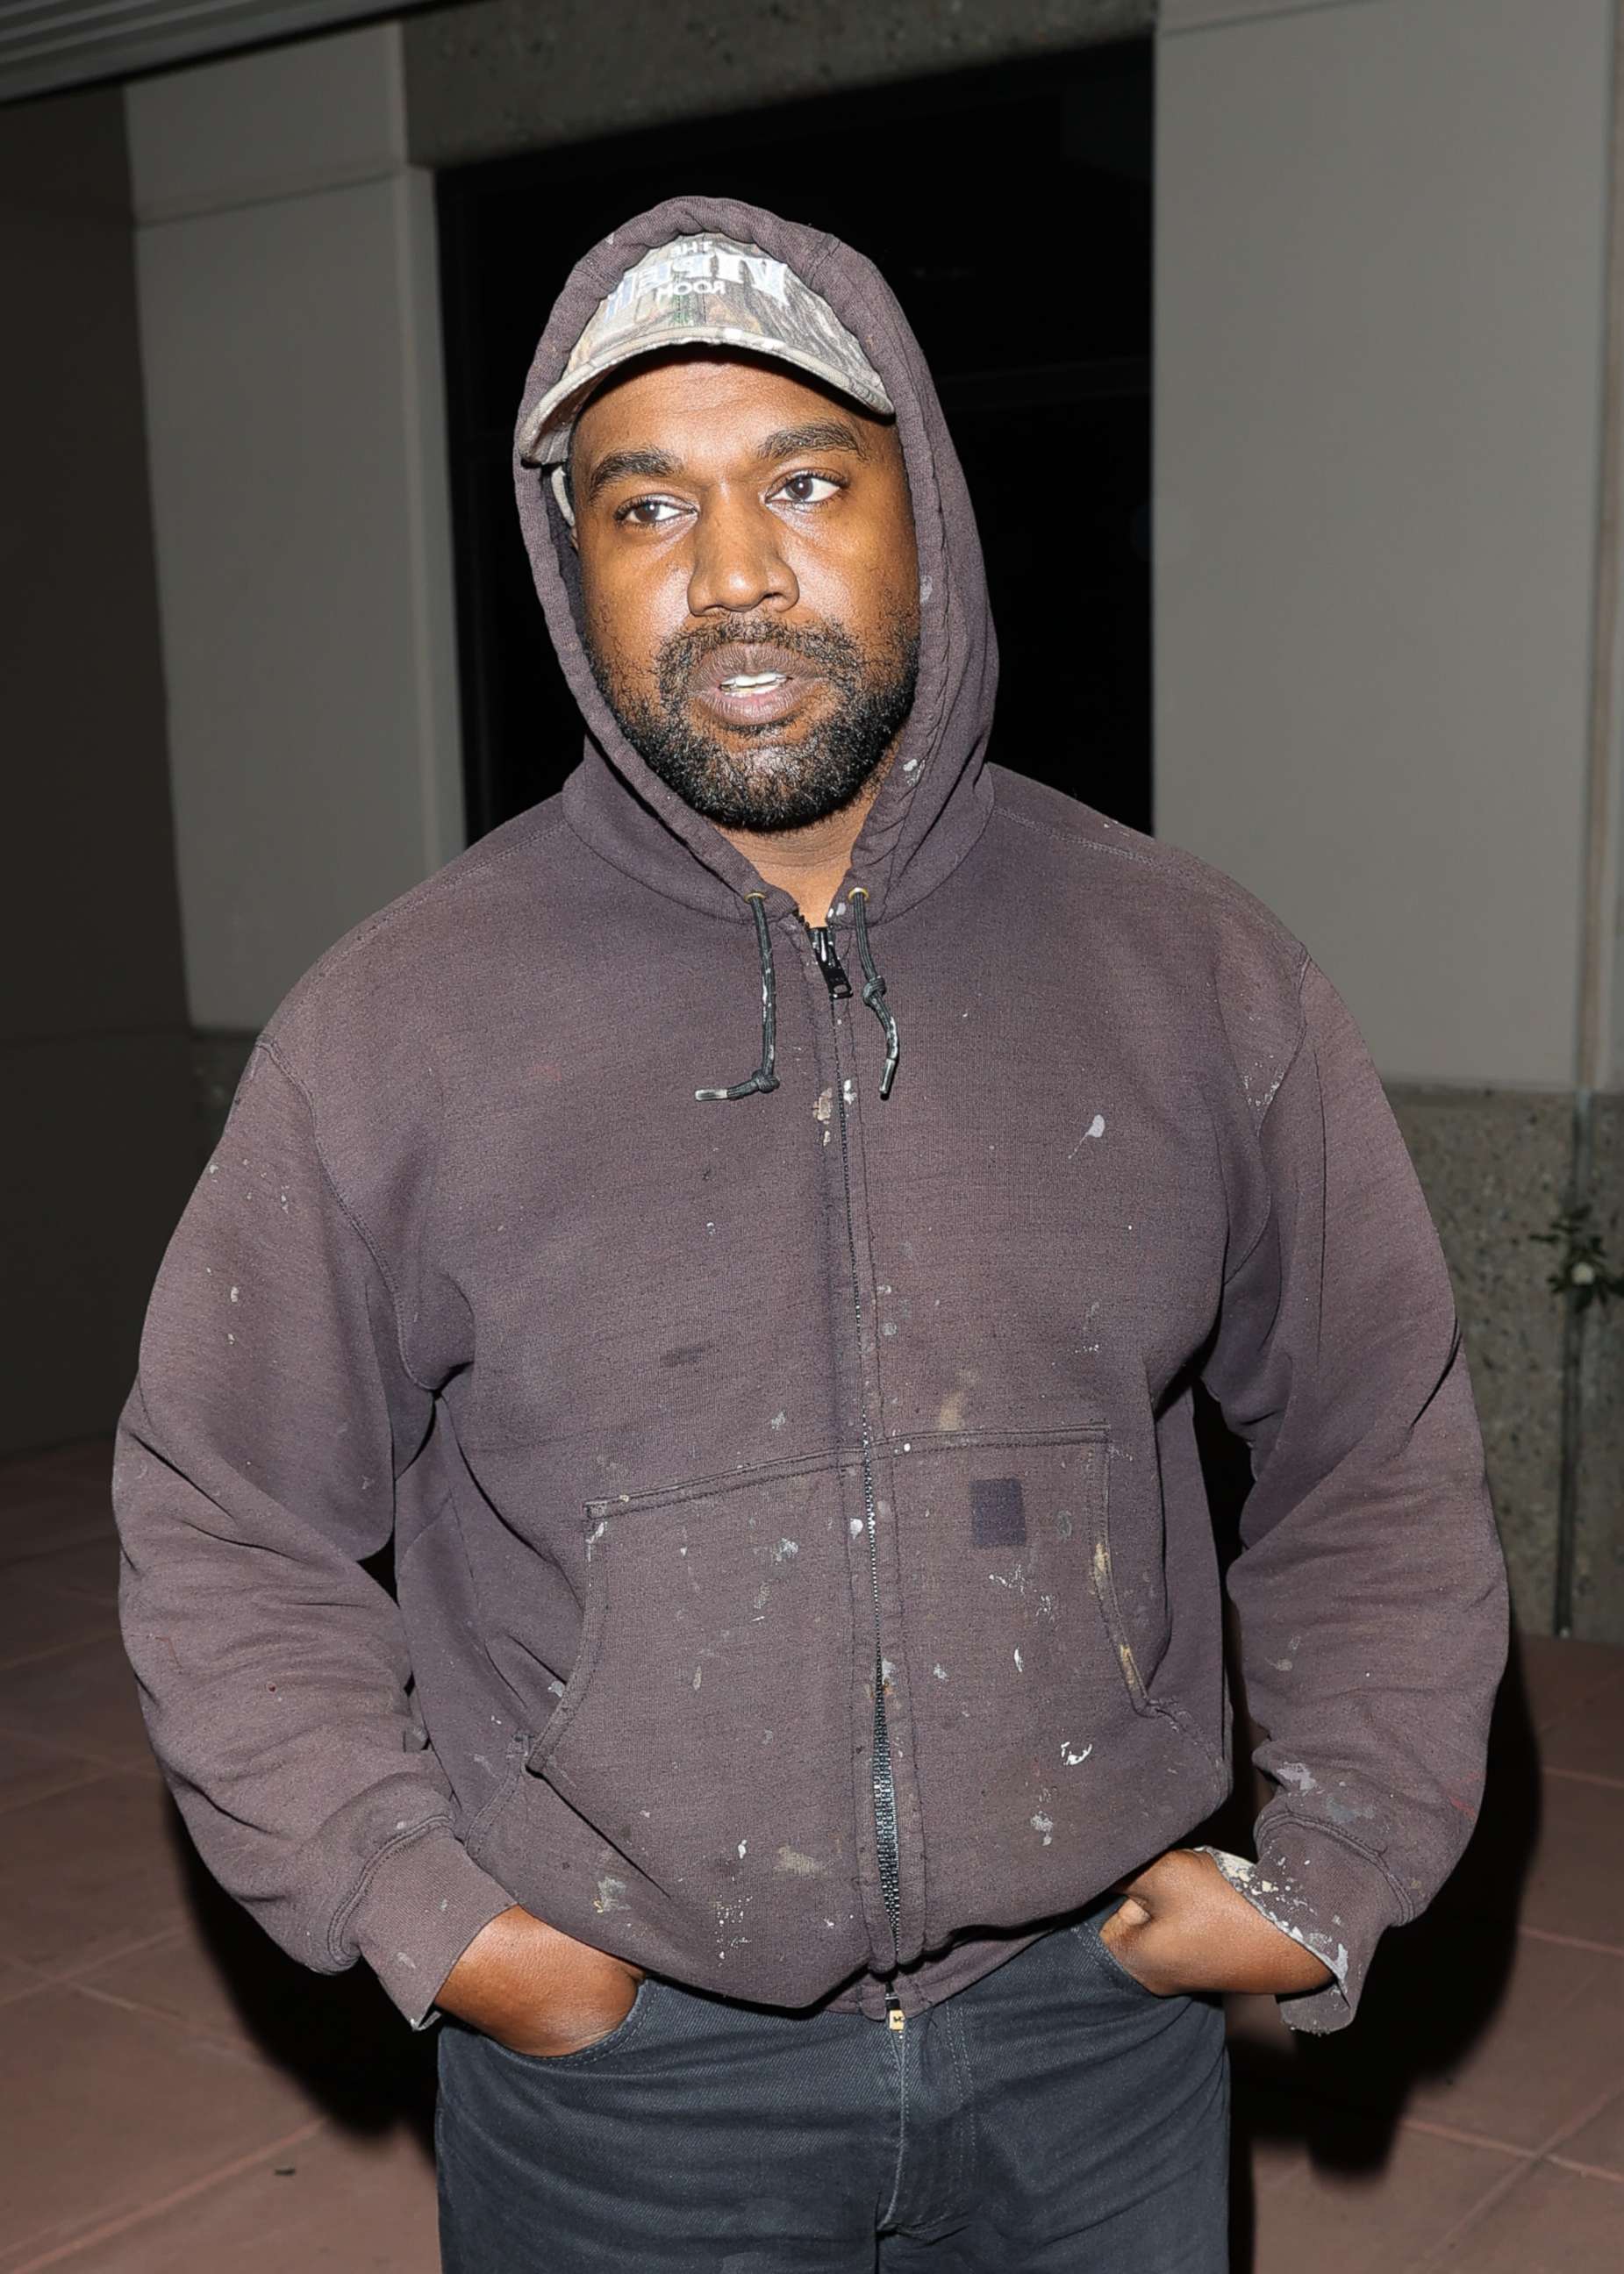 PHOTO: Kanye West in Los Angeles, Oct. 21, 2022.